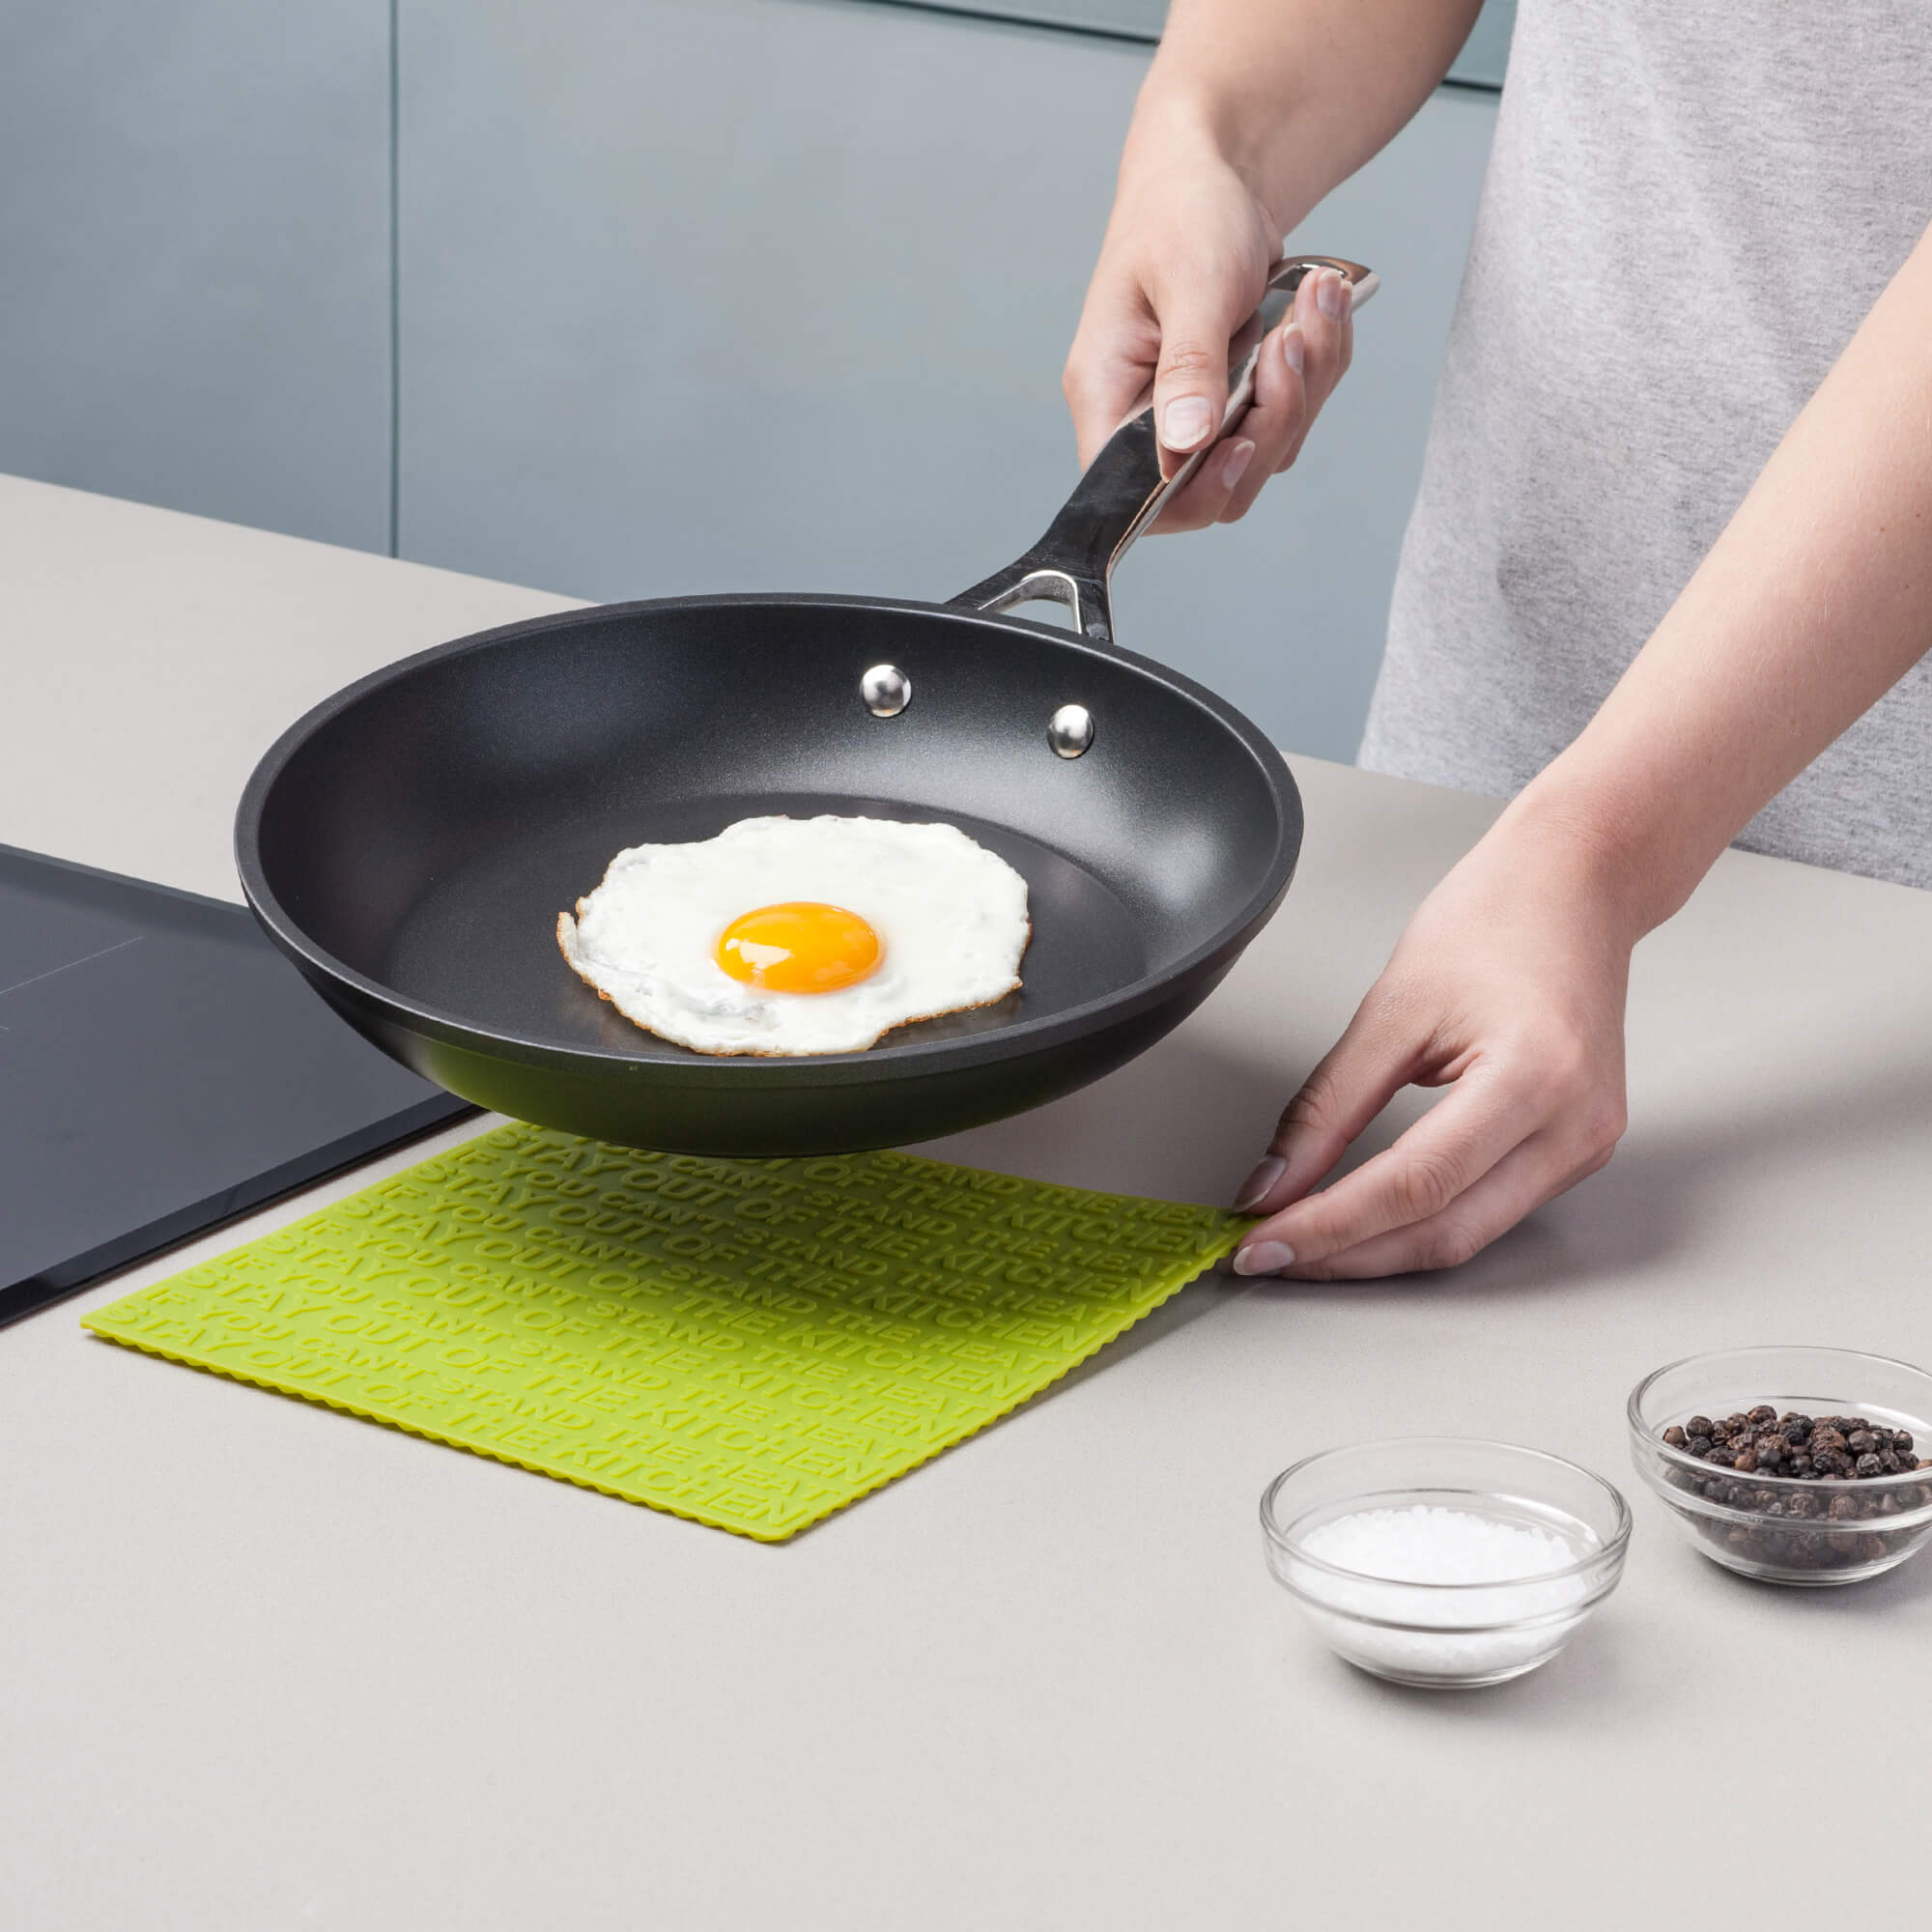 Zeal Silicone Hot Mat with a hot frying pan